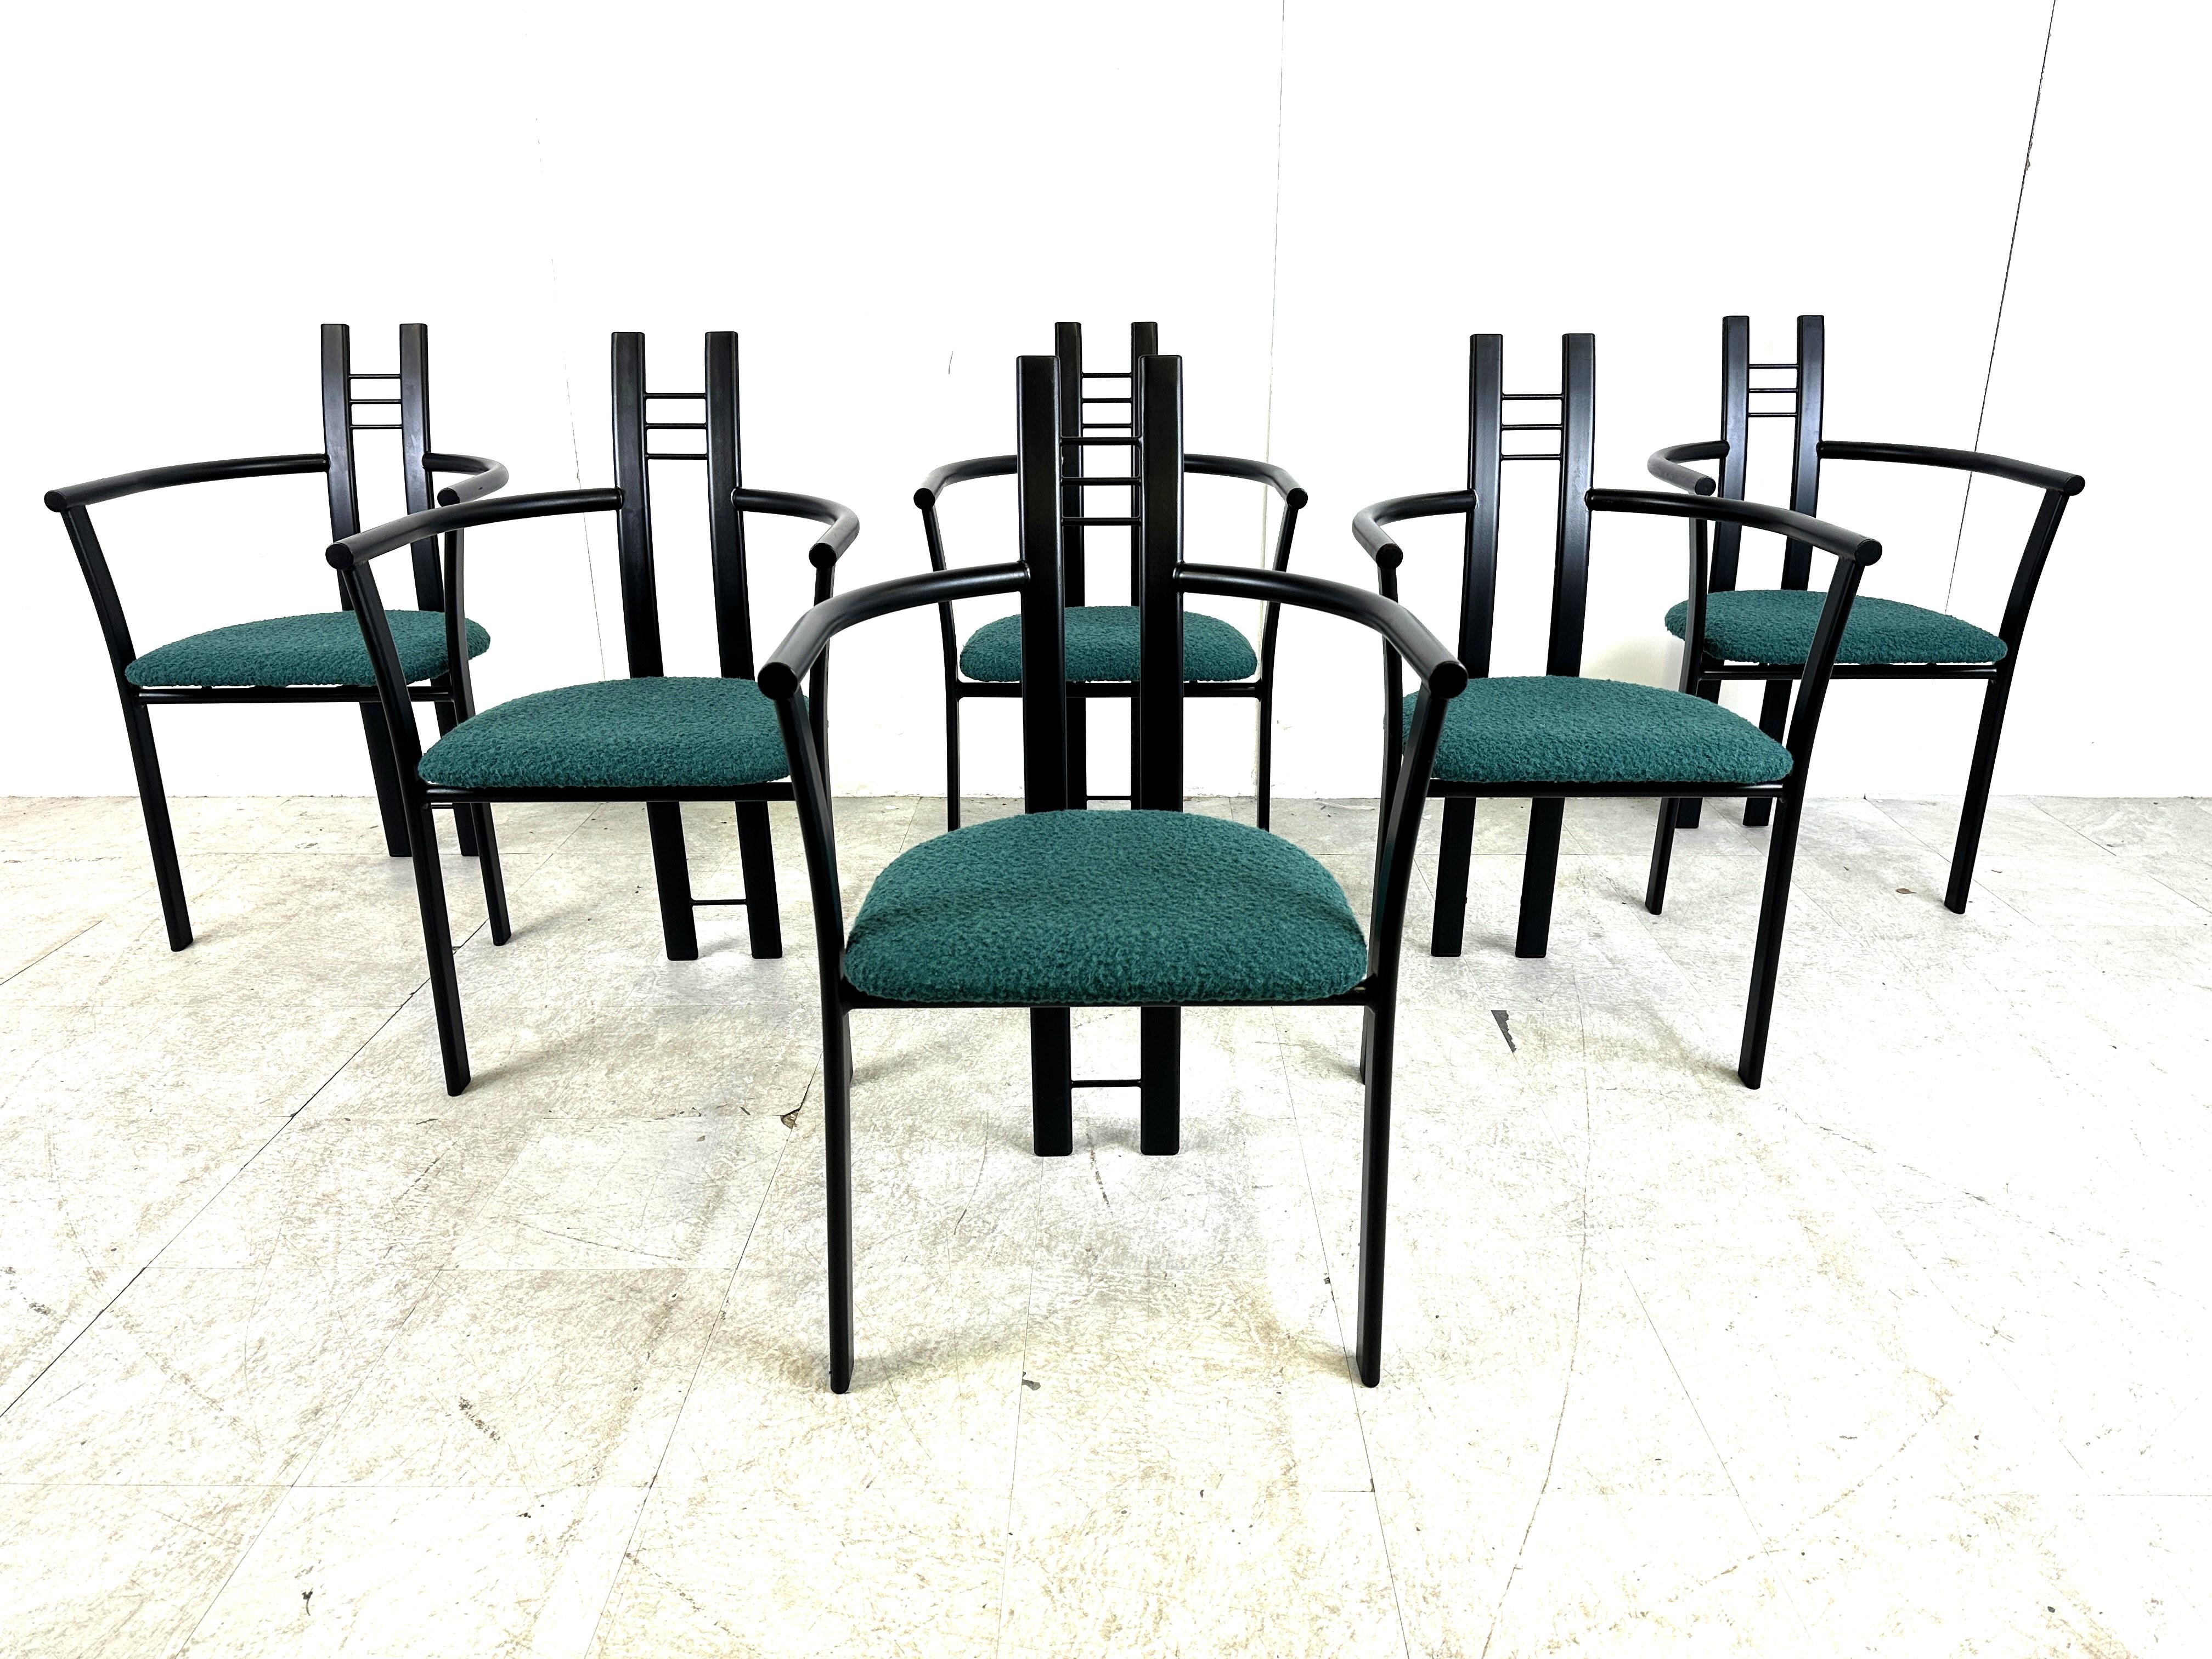 Set of 6 postmodern italian dining chairs with armrests.

Made out of black metal frames and turquoise upholstered fabric seats.

Gorgeous timeless design.

Good condition

1980s - Italy

Dimensions:
Height: 90cm/35.43